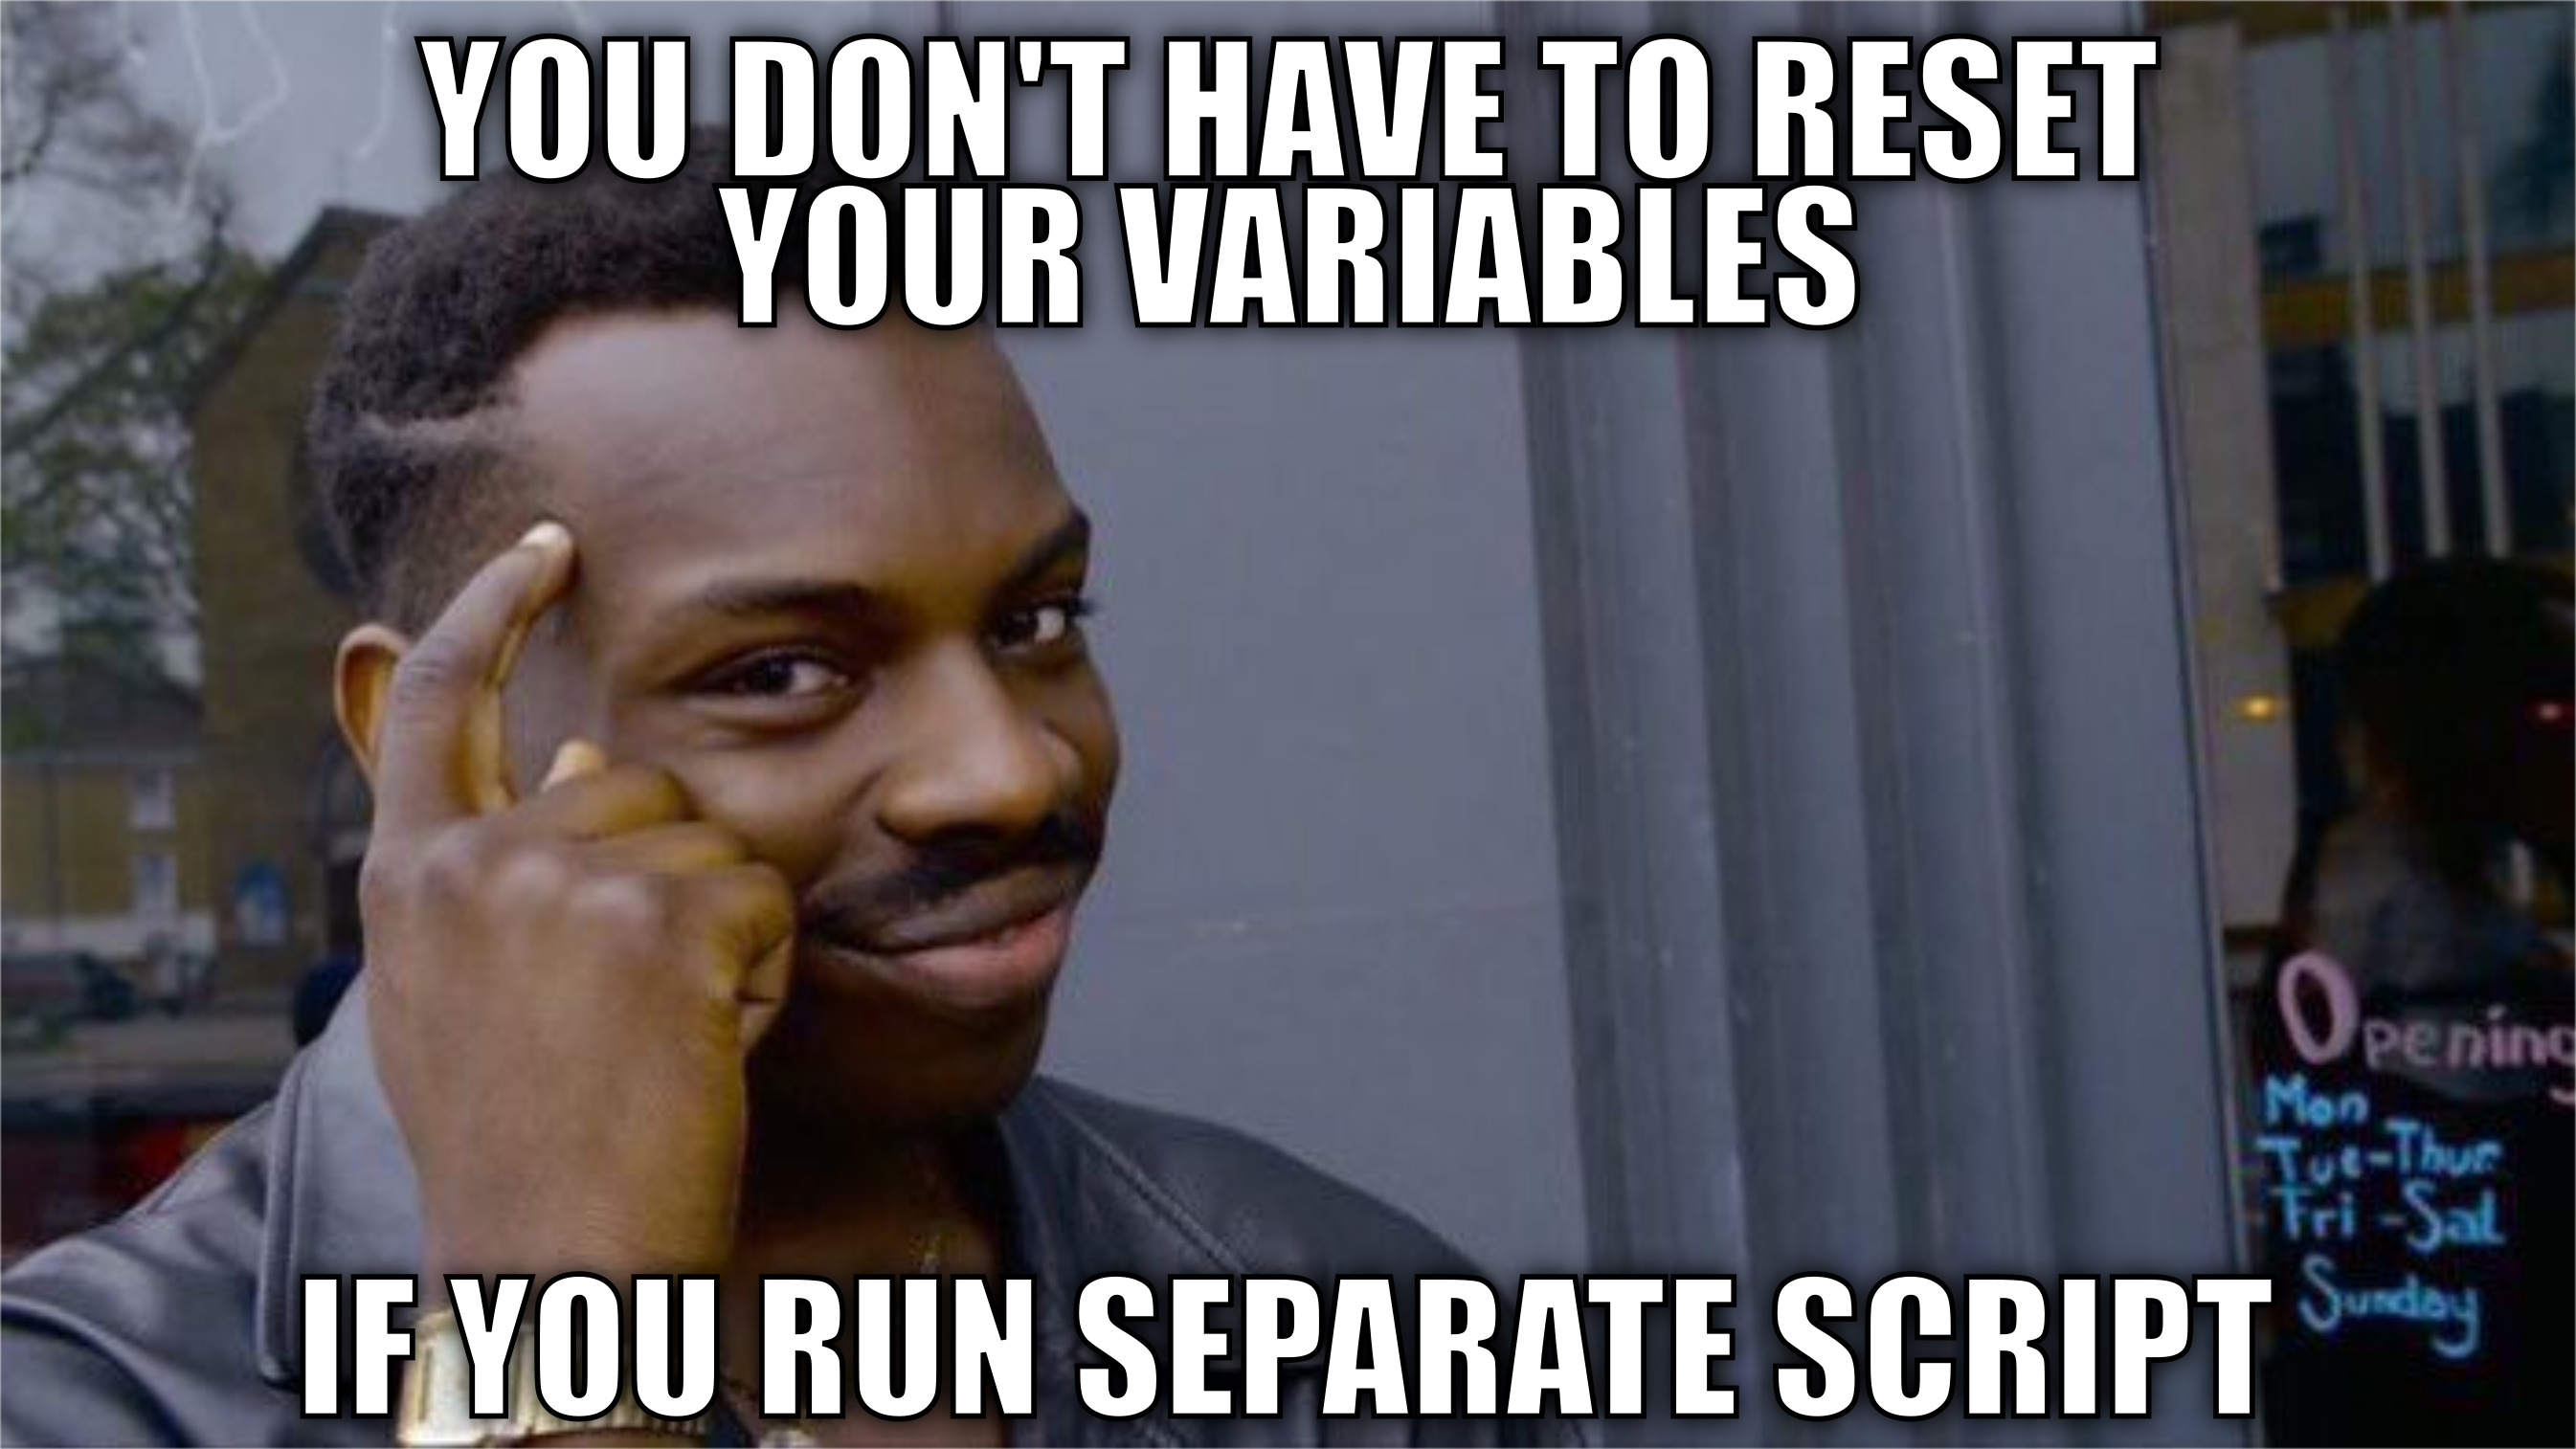 You don't have to reset you variables if you run separate script.